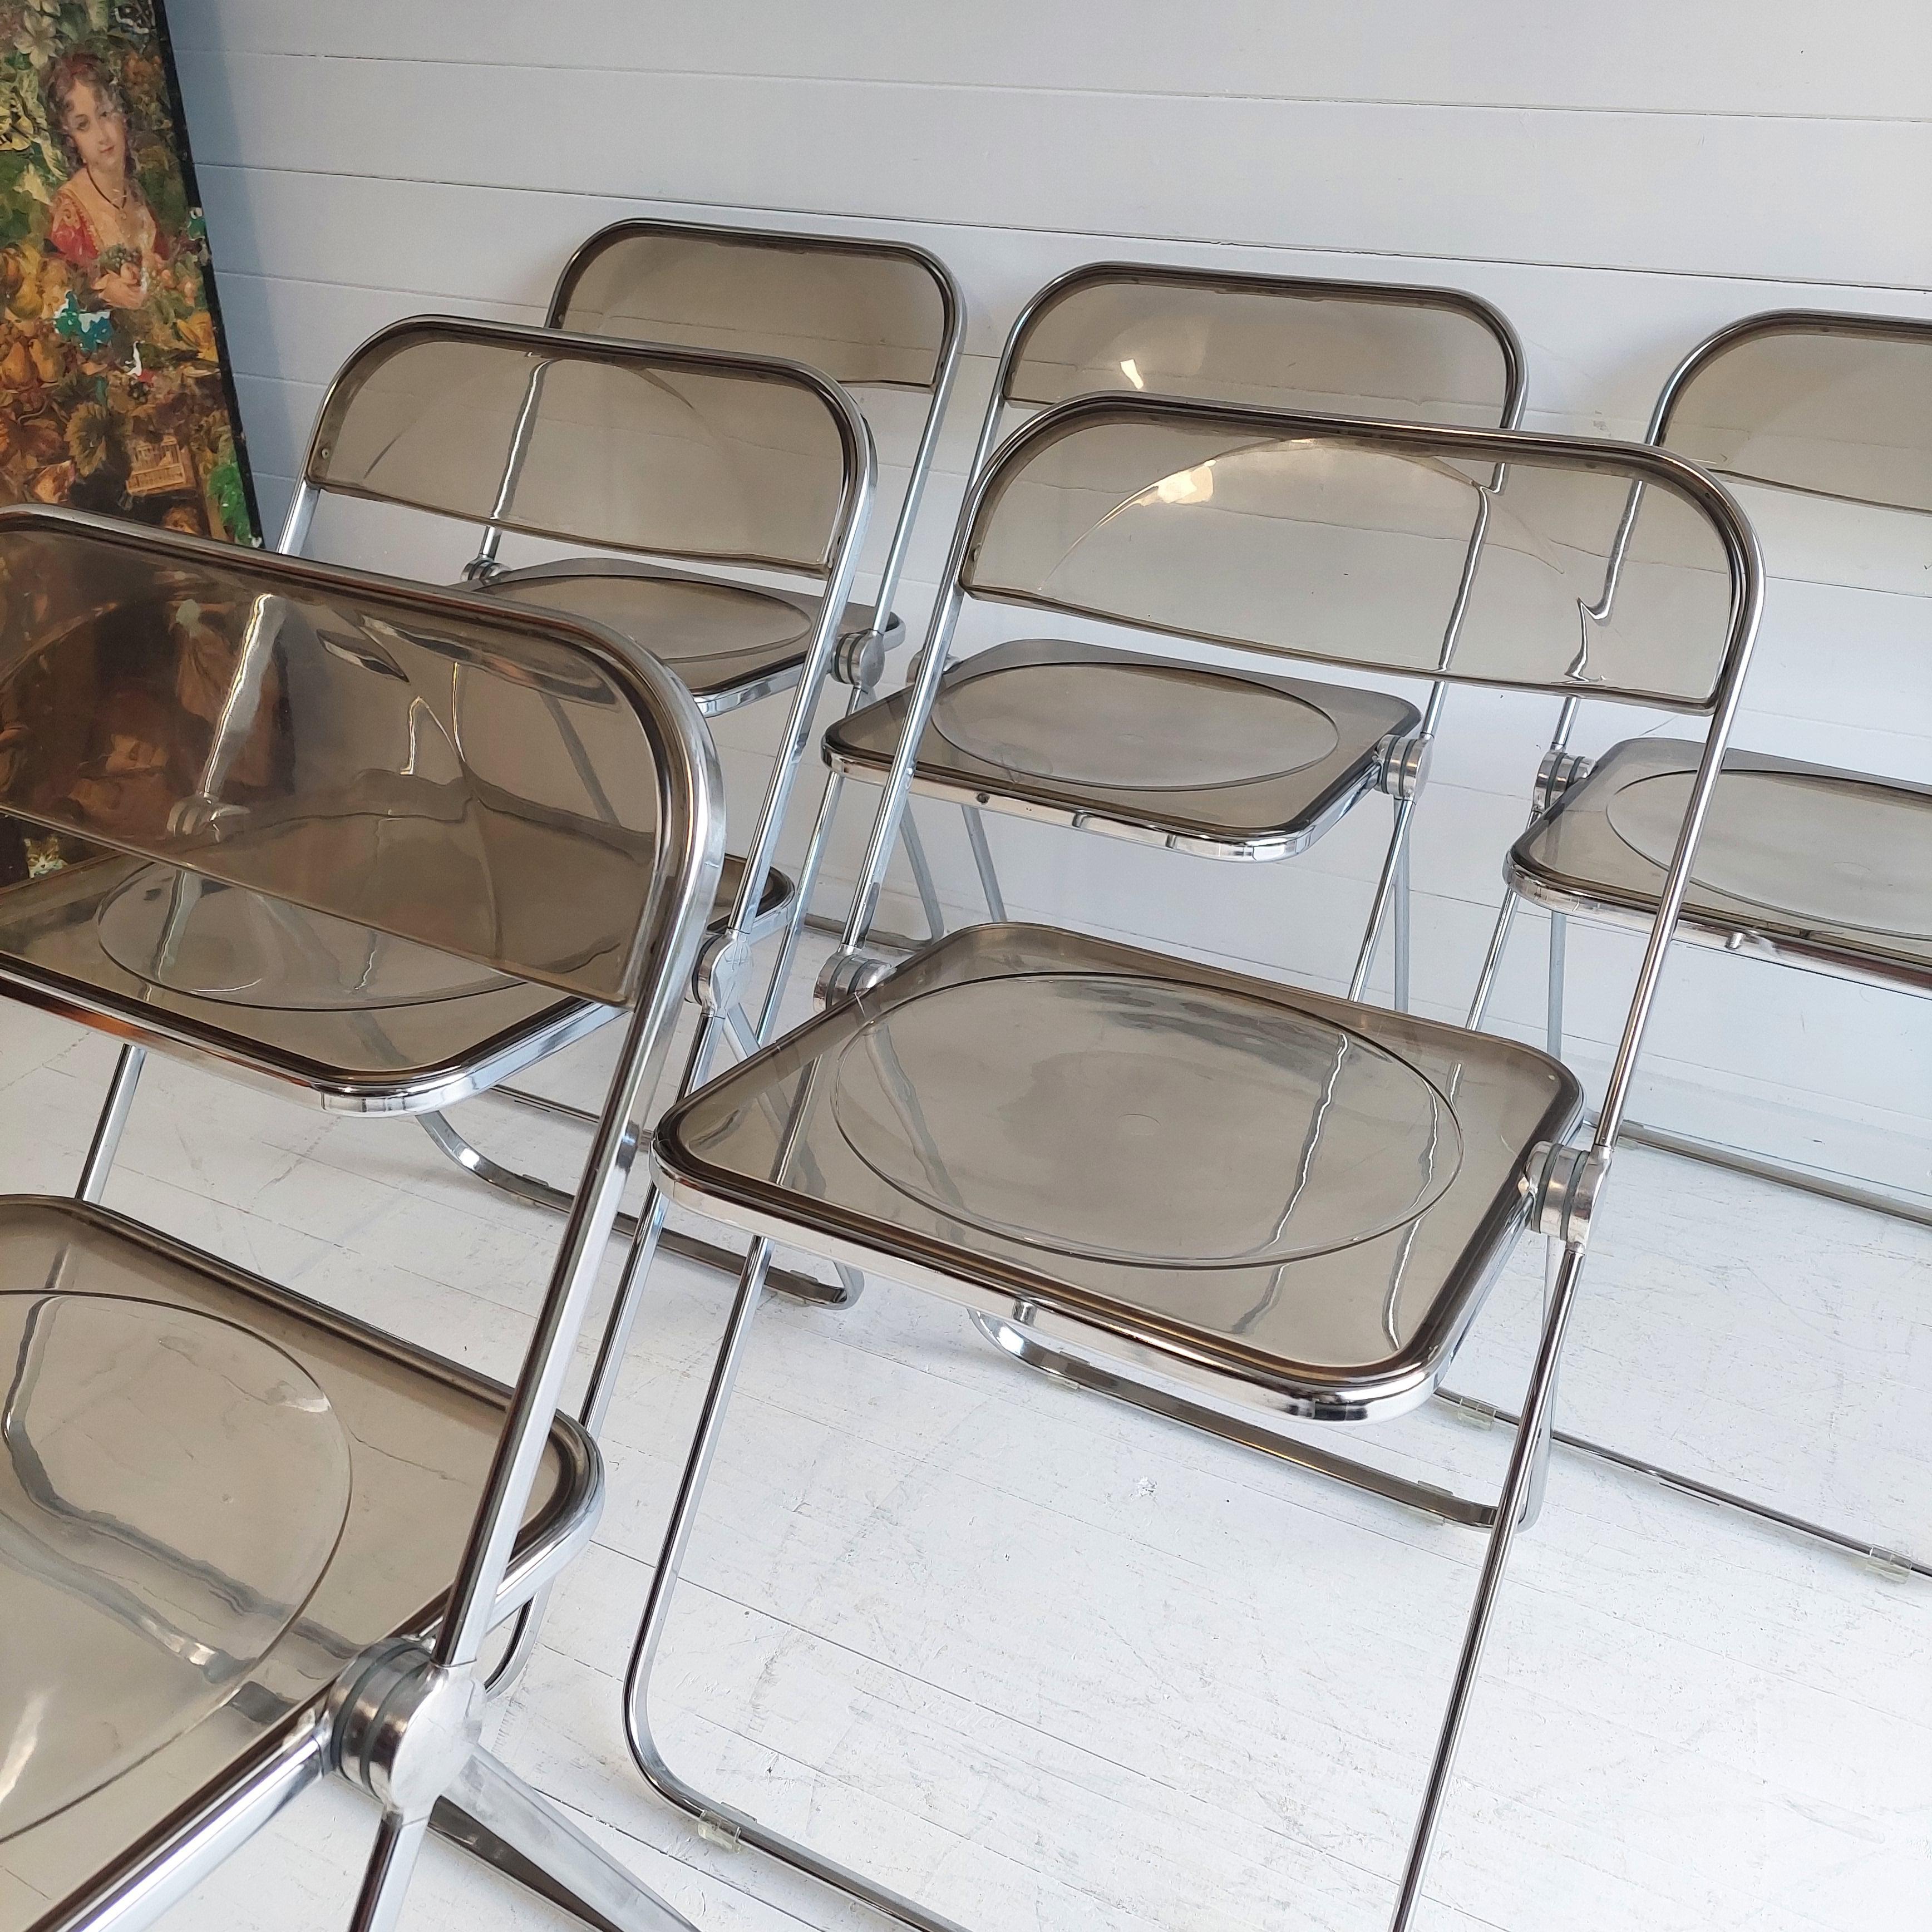 20th Century Plia Folding Chairs by Giancarlo Piretti for Castelli 60/70s Set of 4 For Sale